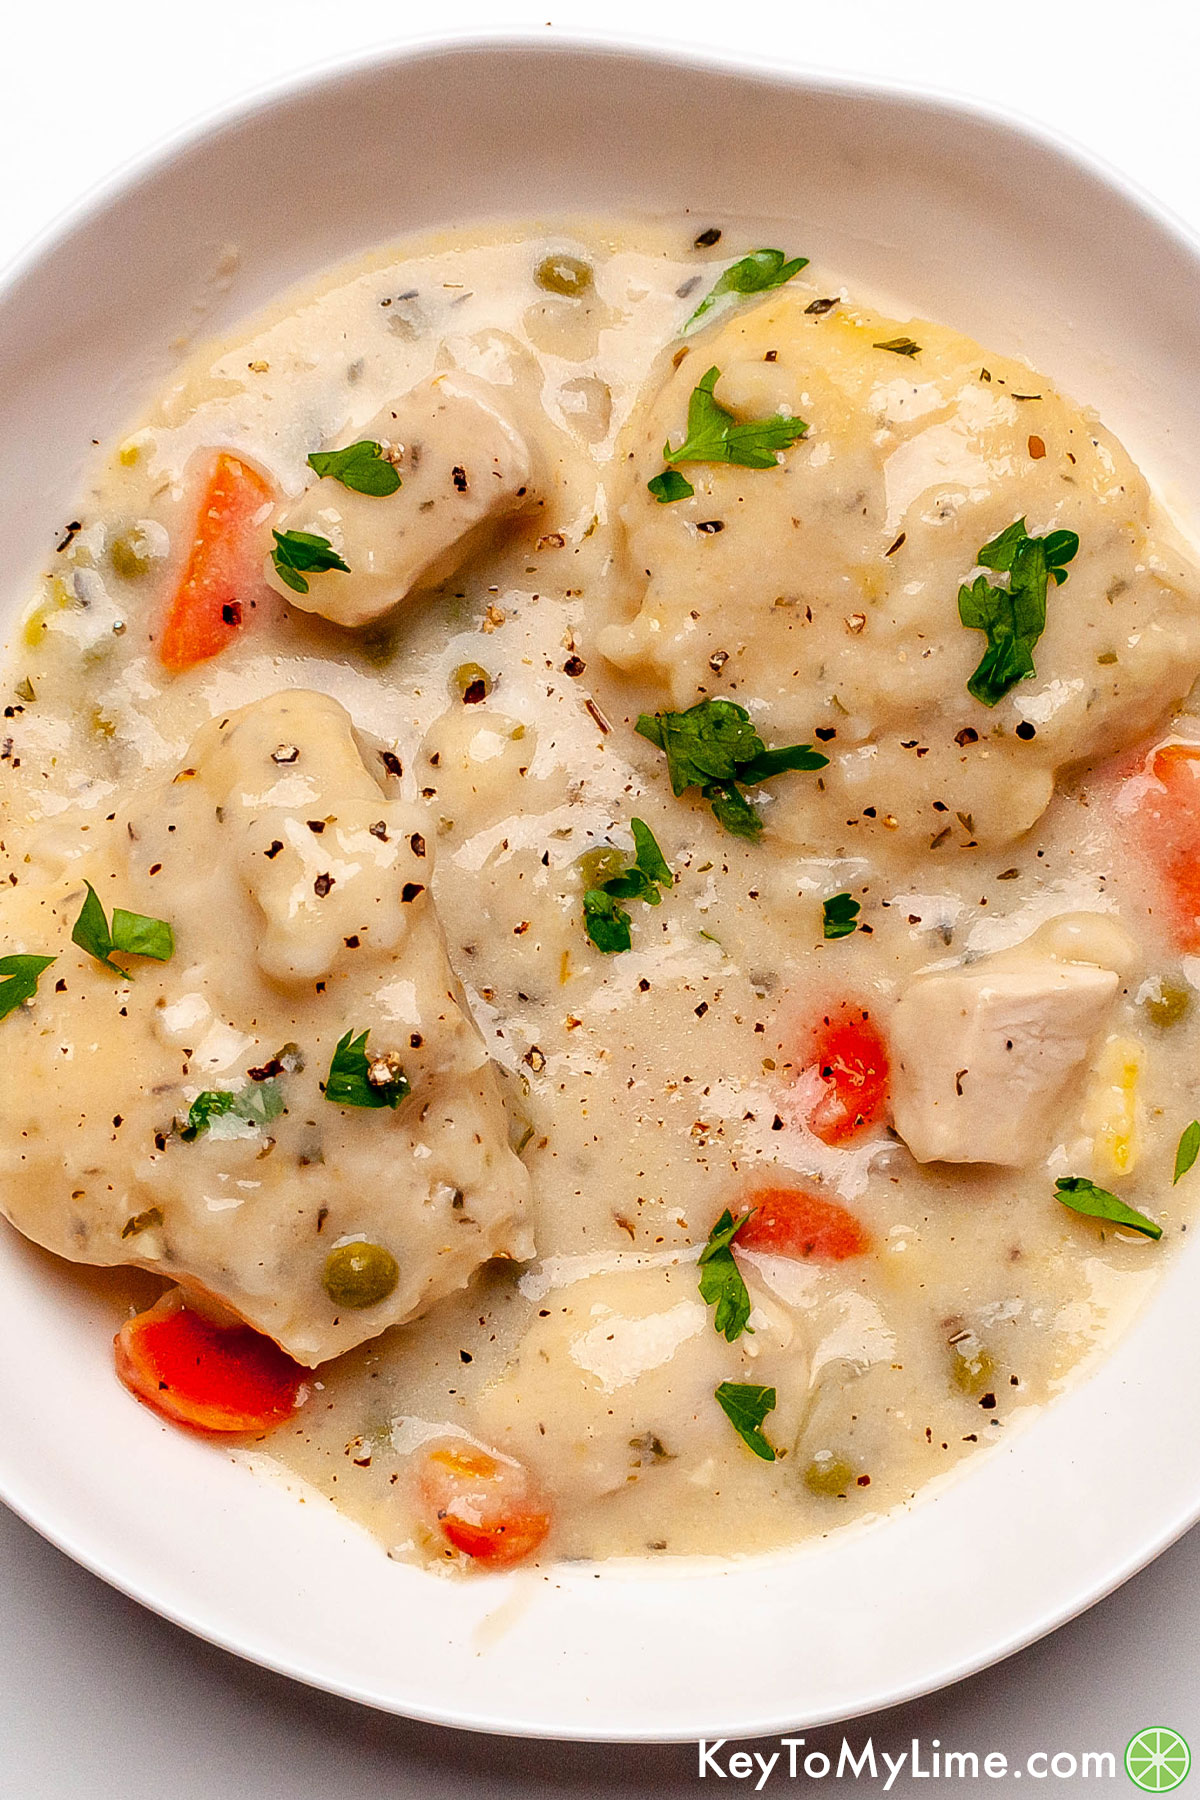 A bowl of chicken and dumplings made with Bisquick dumplings.